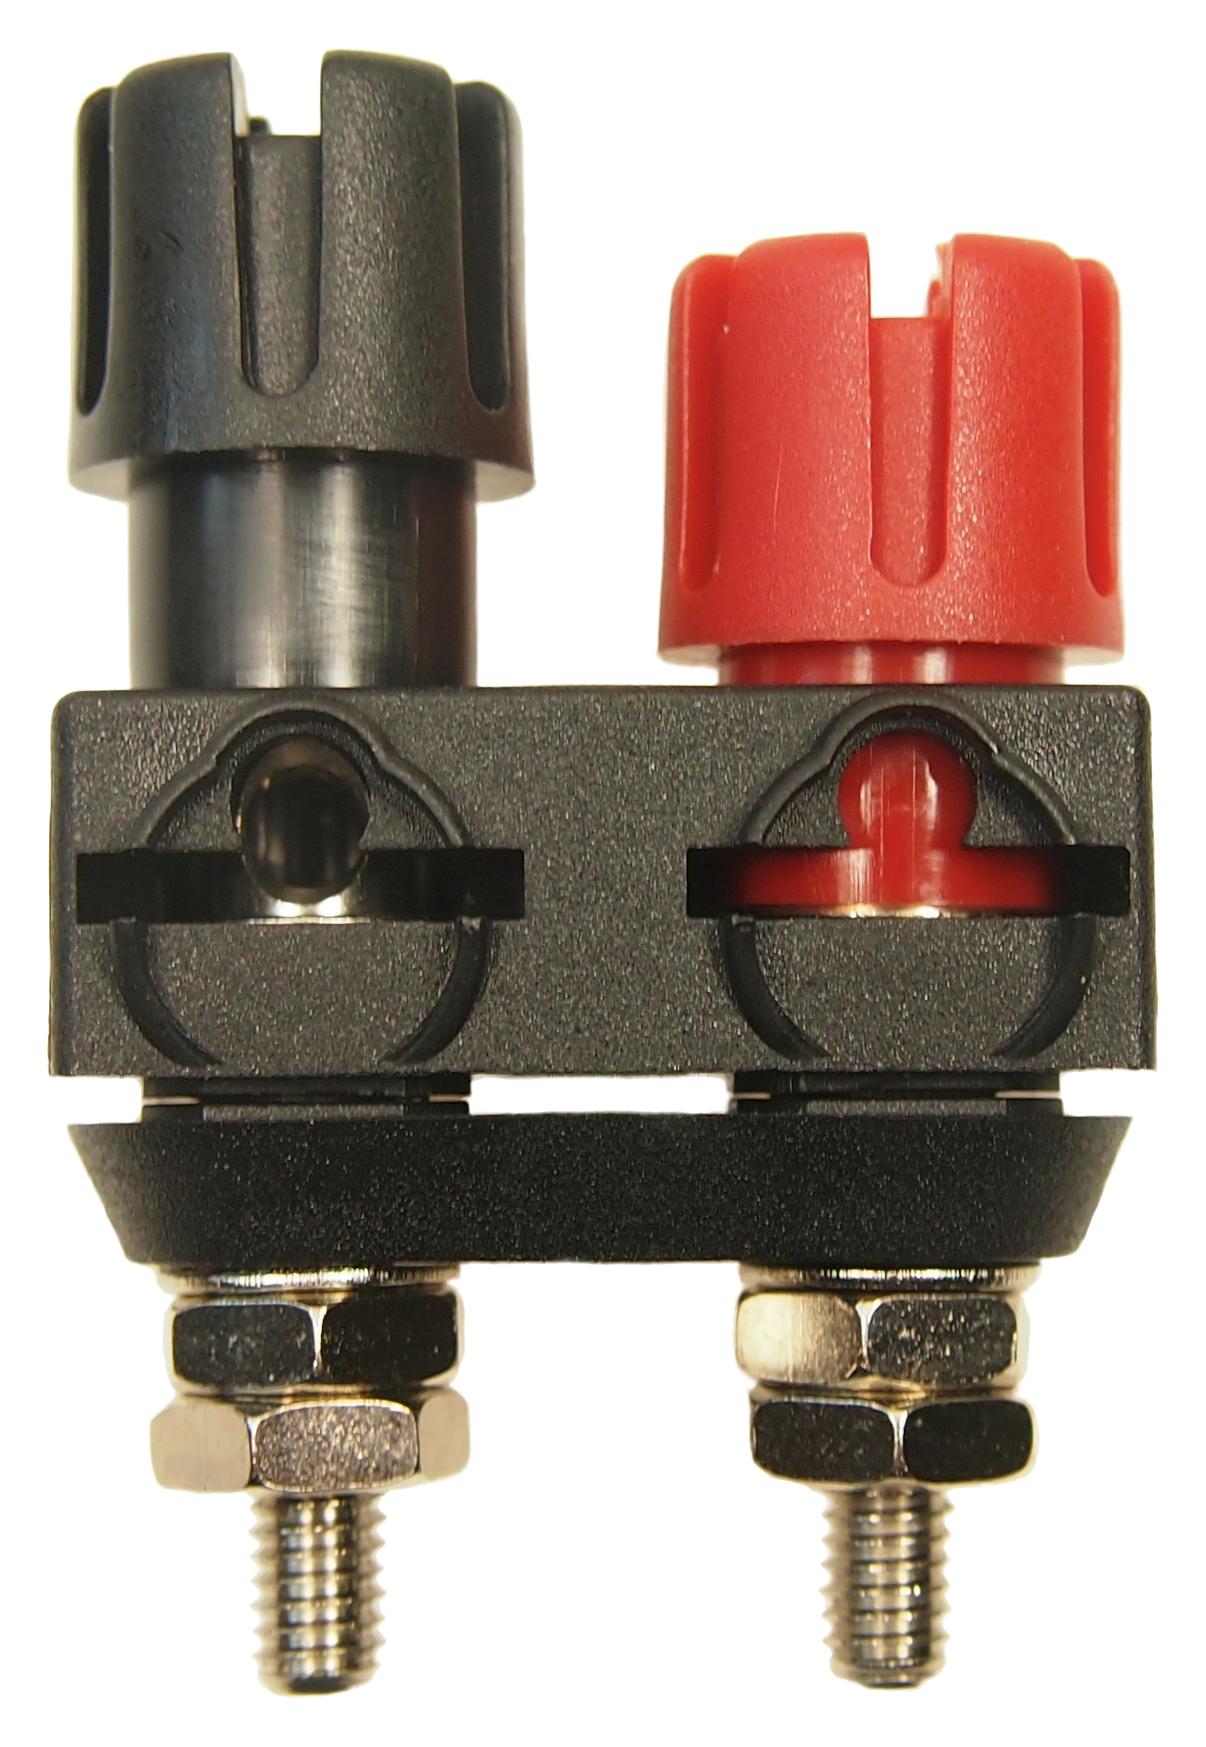 MP770670 BINDING POST, 30A, BLACK/RED, NICKEL MULTICOMP PRO